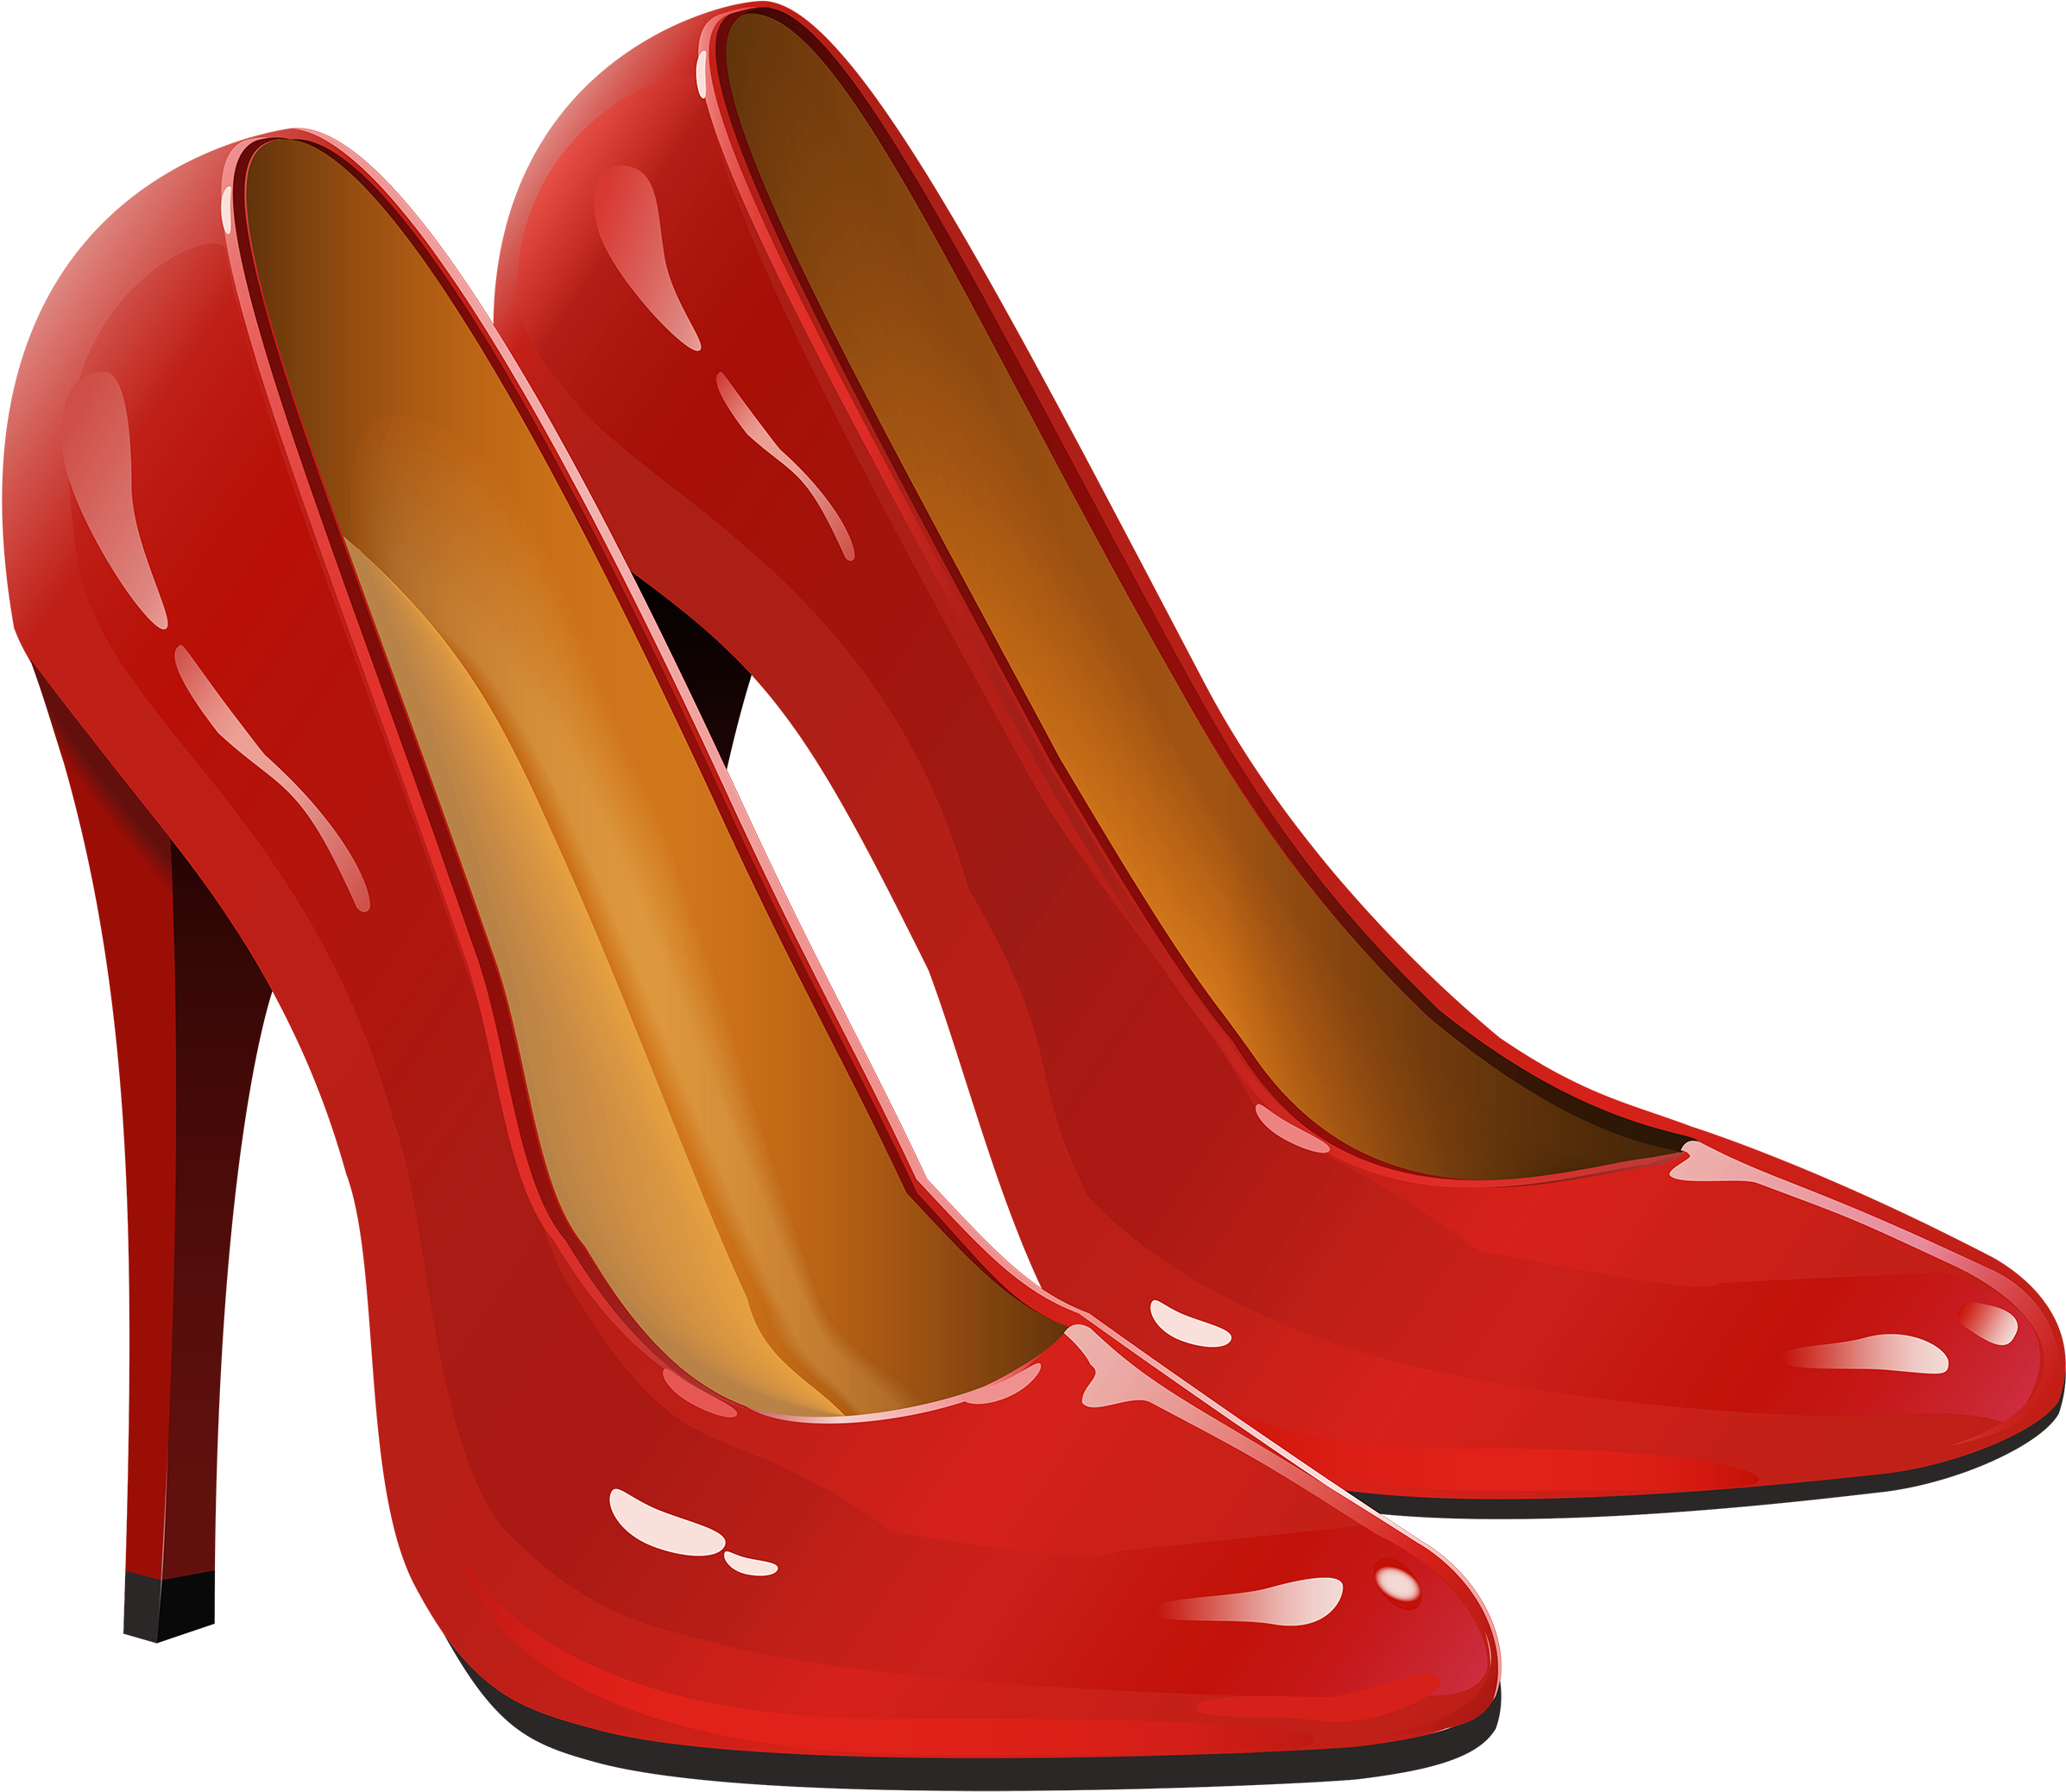 Dorothy Red Shoes Clipart - High Heels Png - (2500x2151) Png Clipart Downlo...